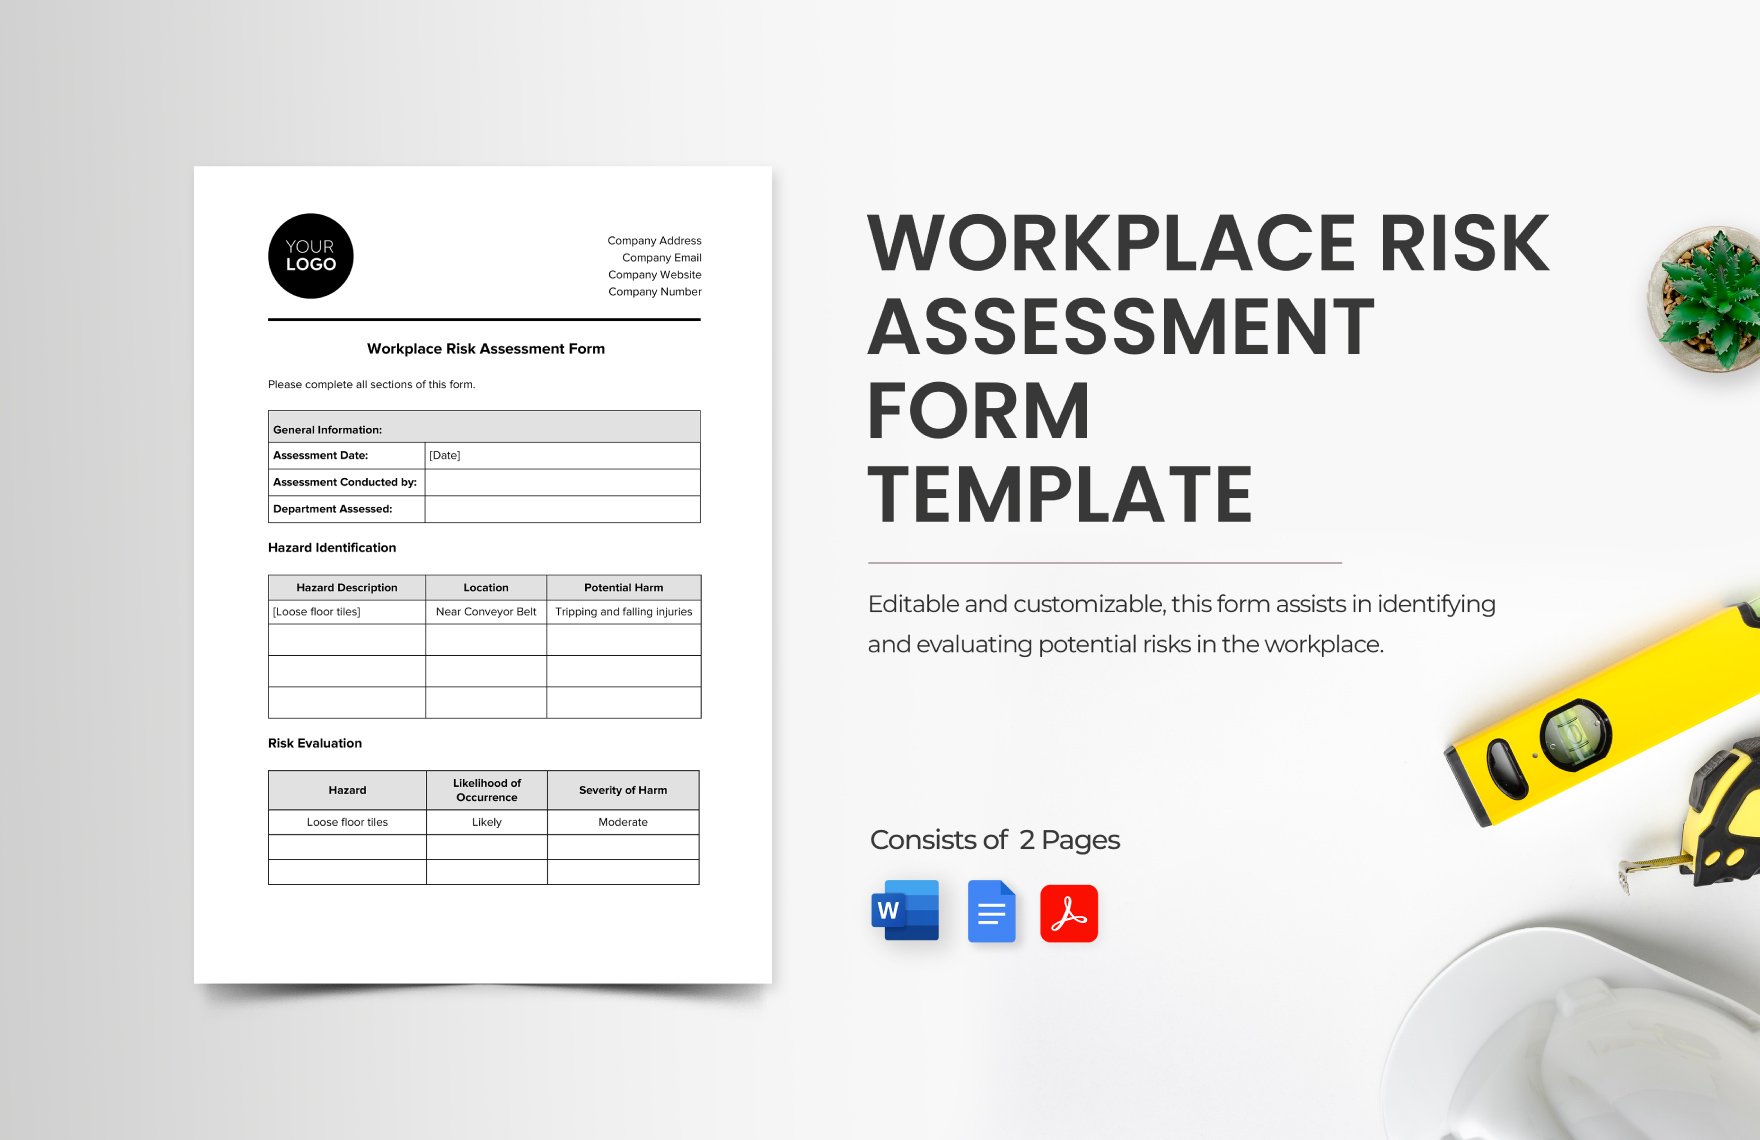 Workplace Risk Assessment Form Template in Word, Google Docs, PDF